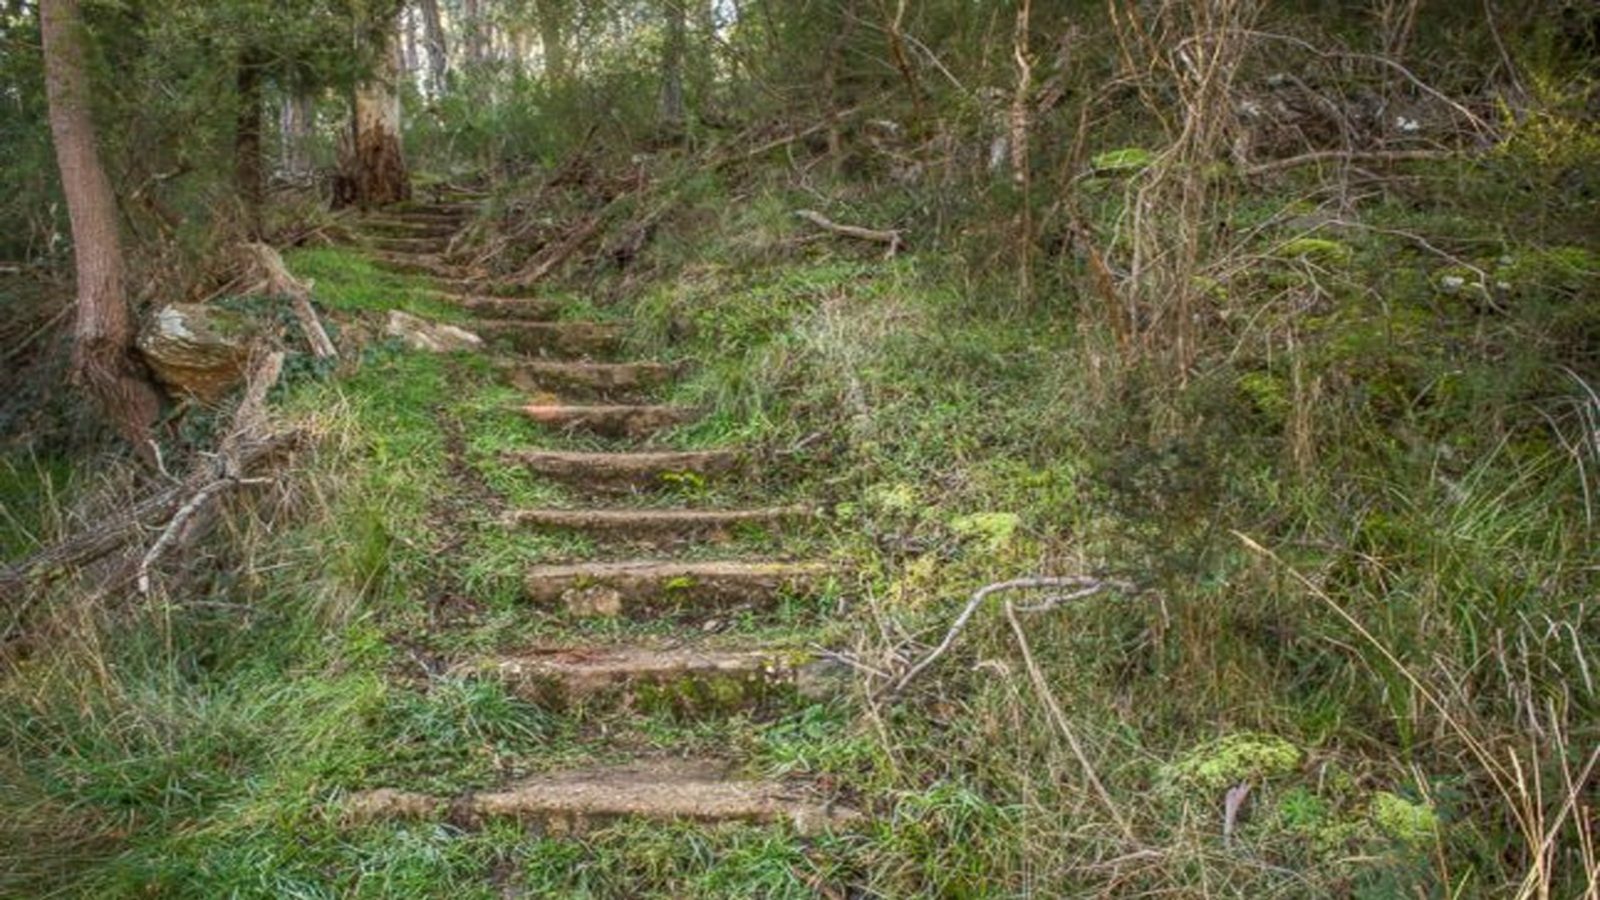 wooden steps in forest covered in grass and branches